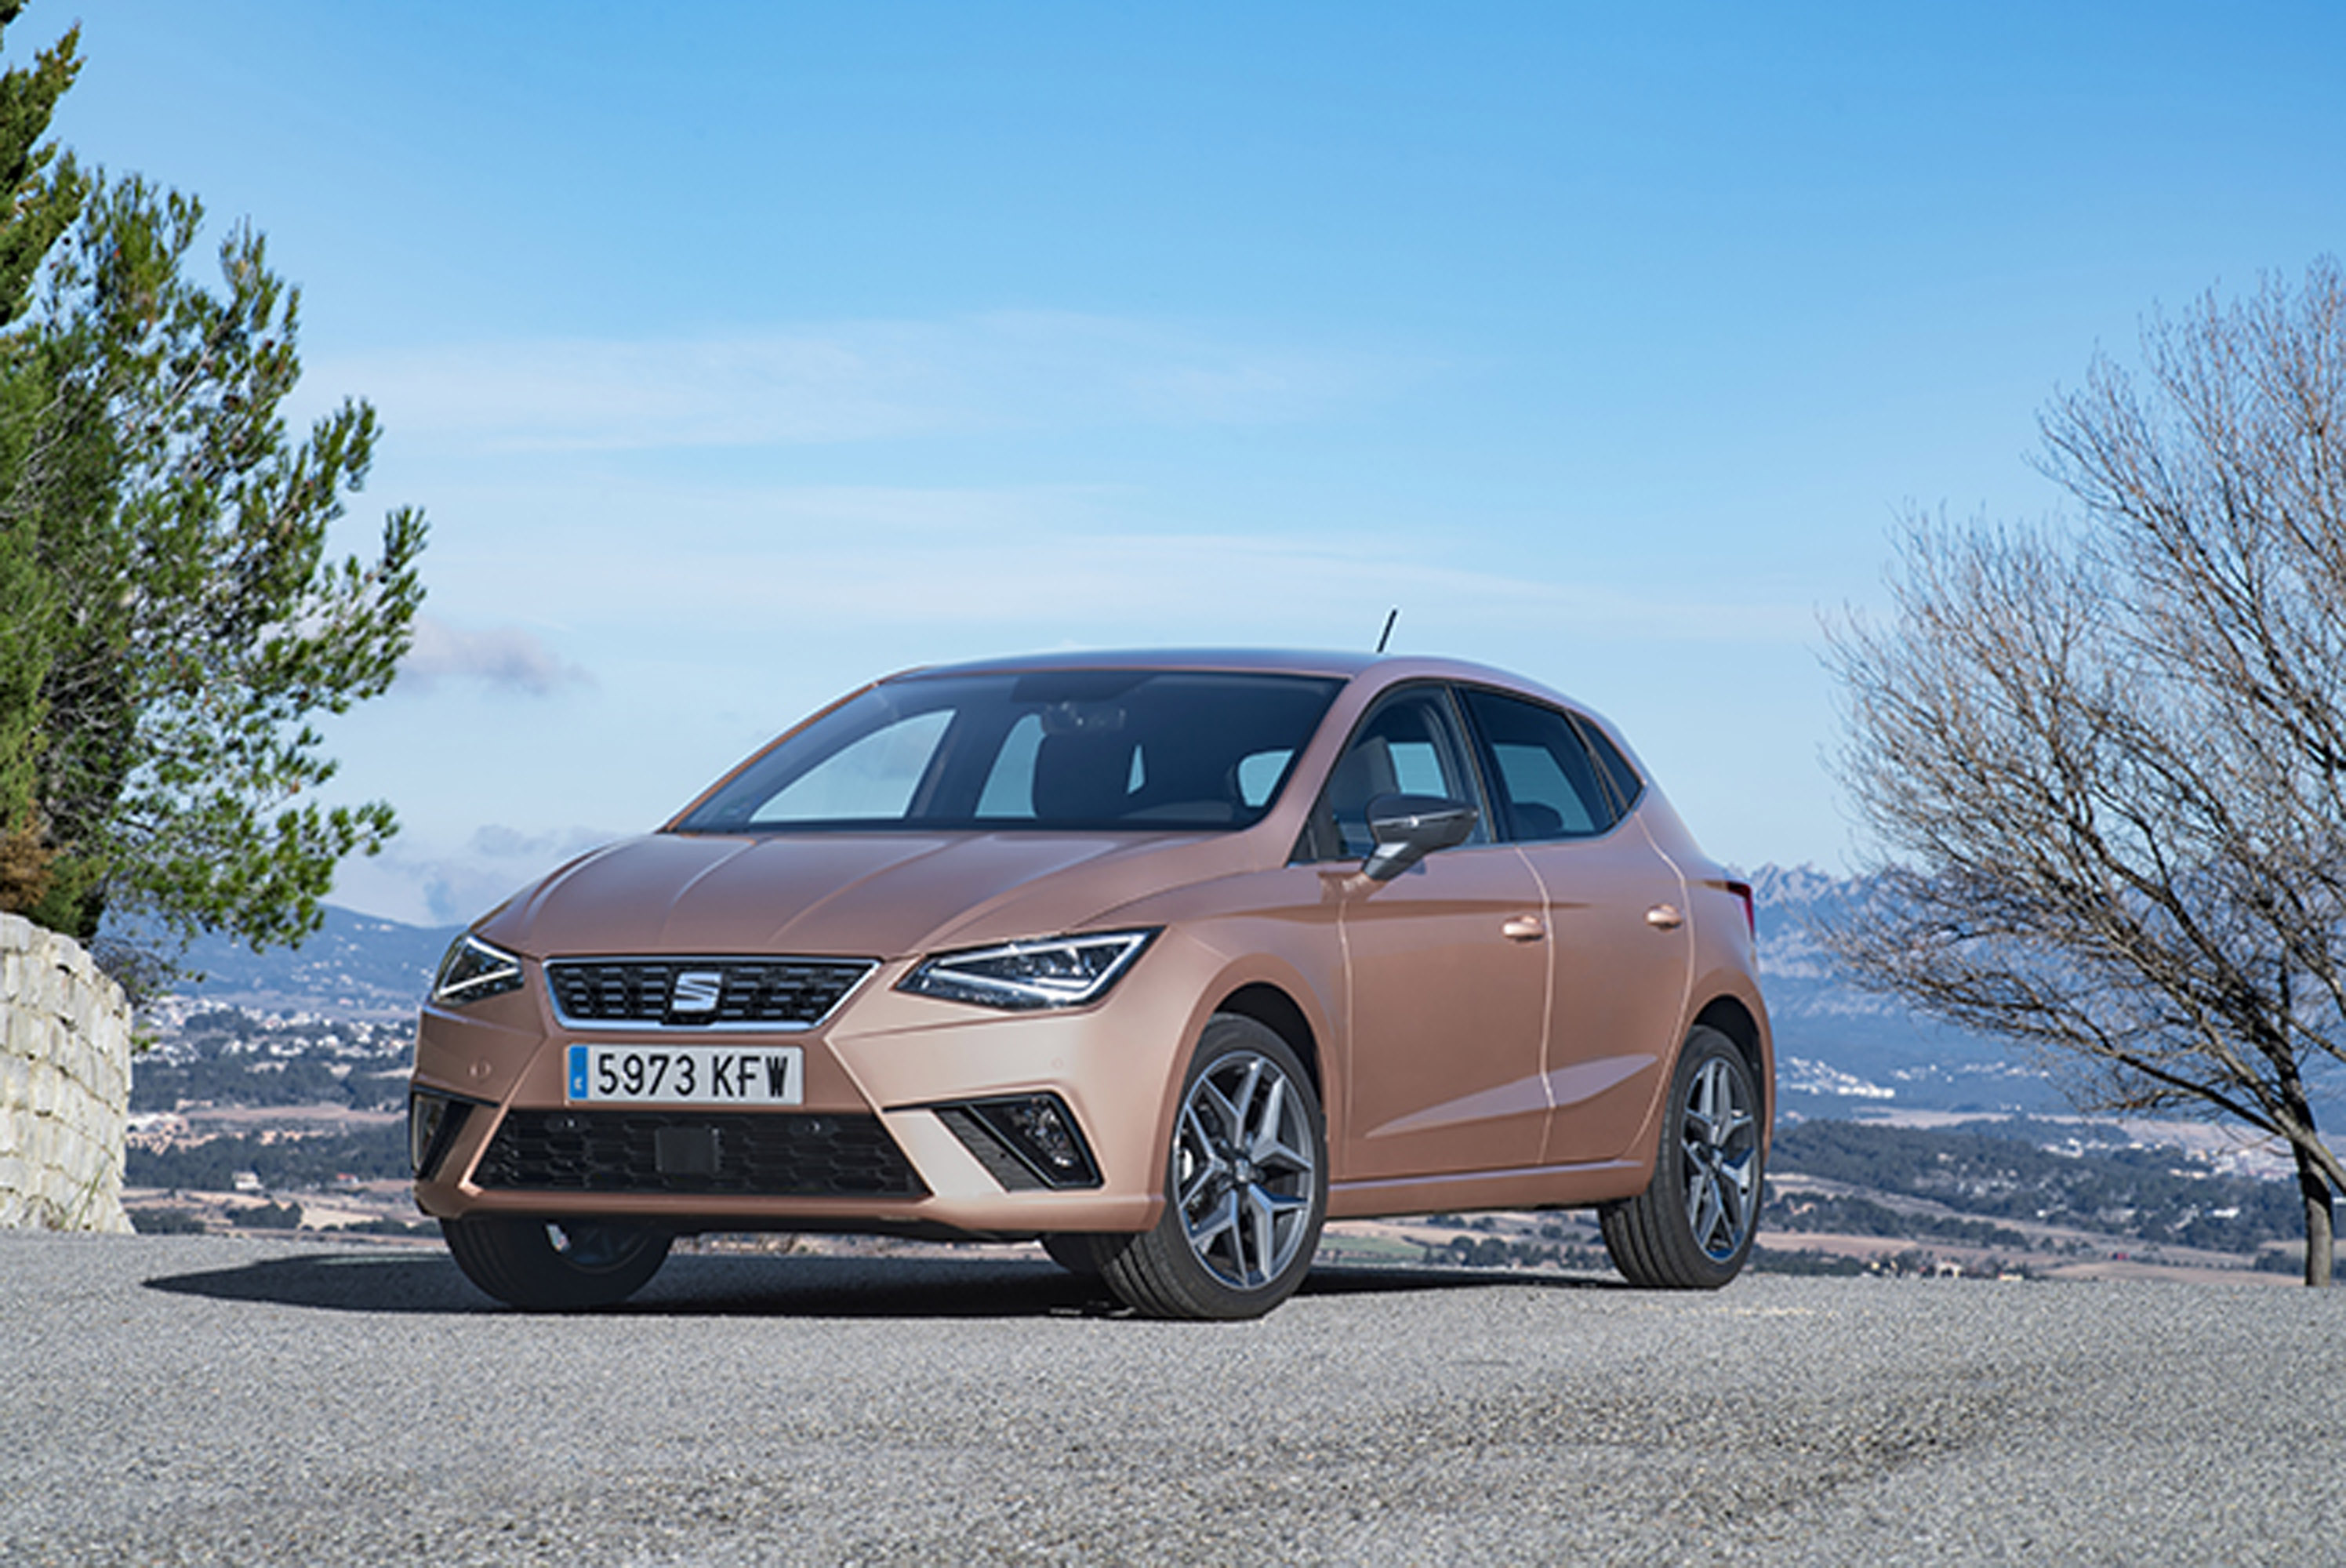 The new Seat Ibiza is modest in design, but strong in performance